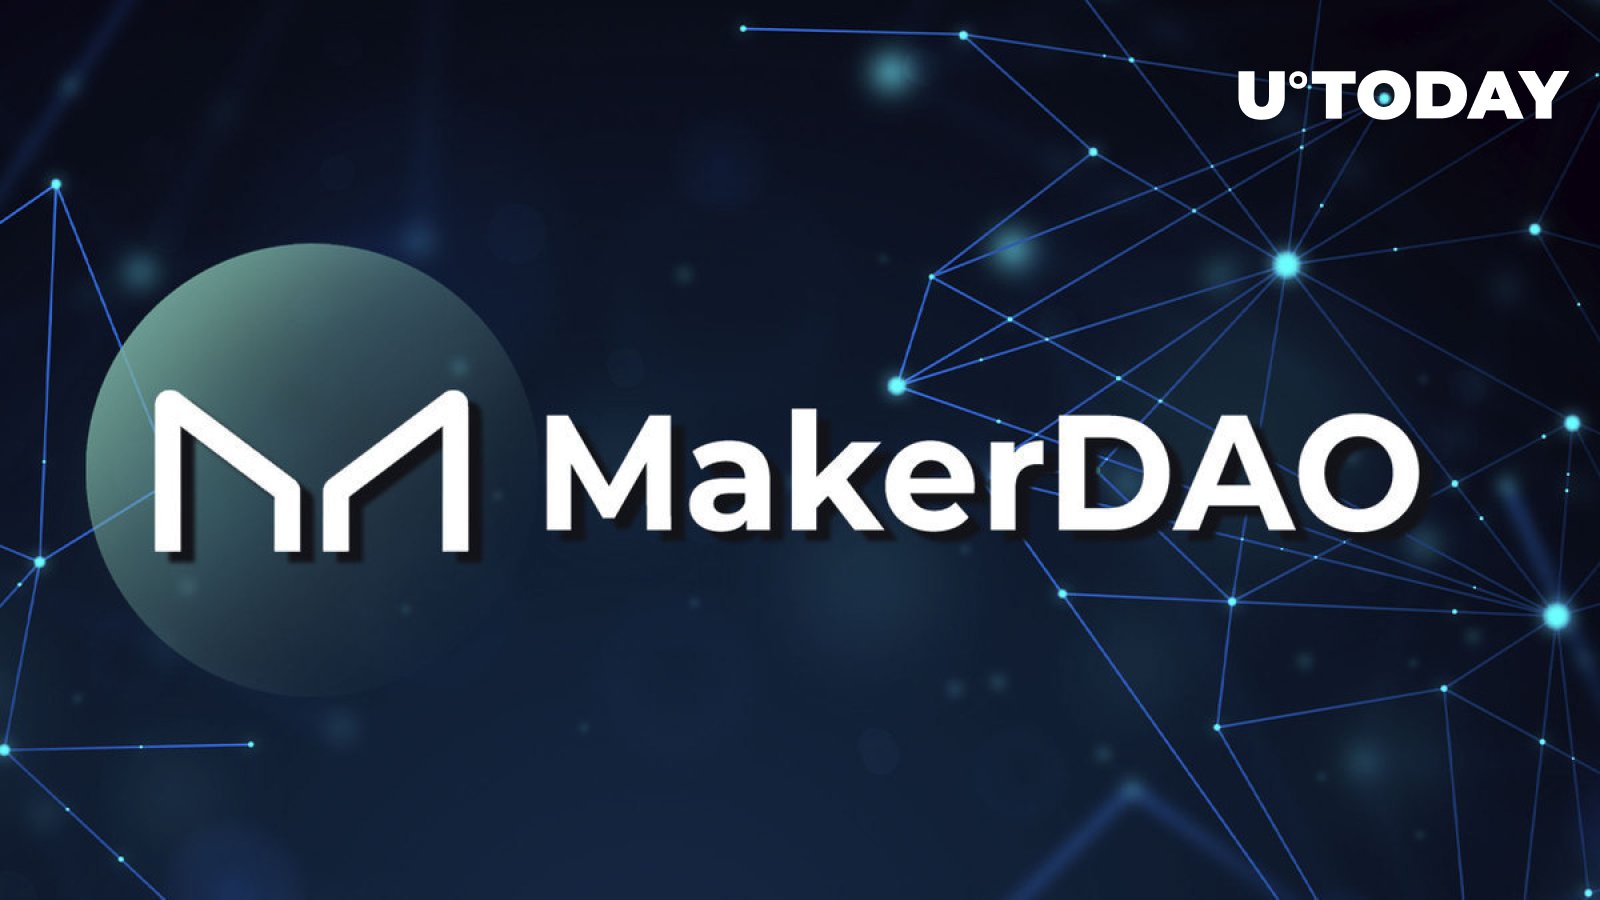 Here’s What Co-Founder Of MakerDAO Buying and Selling